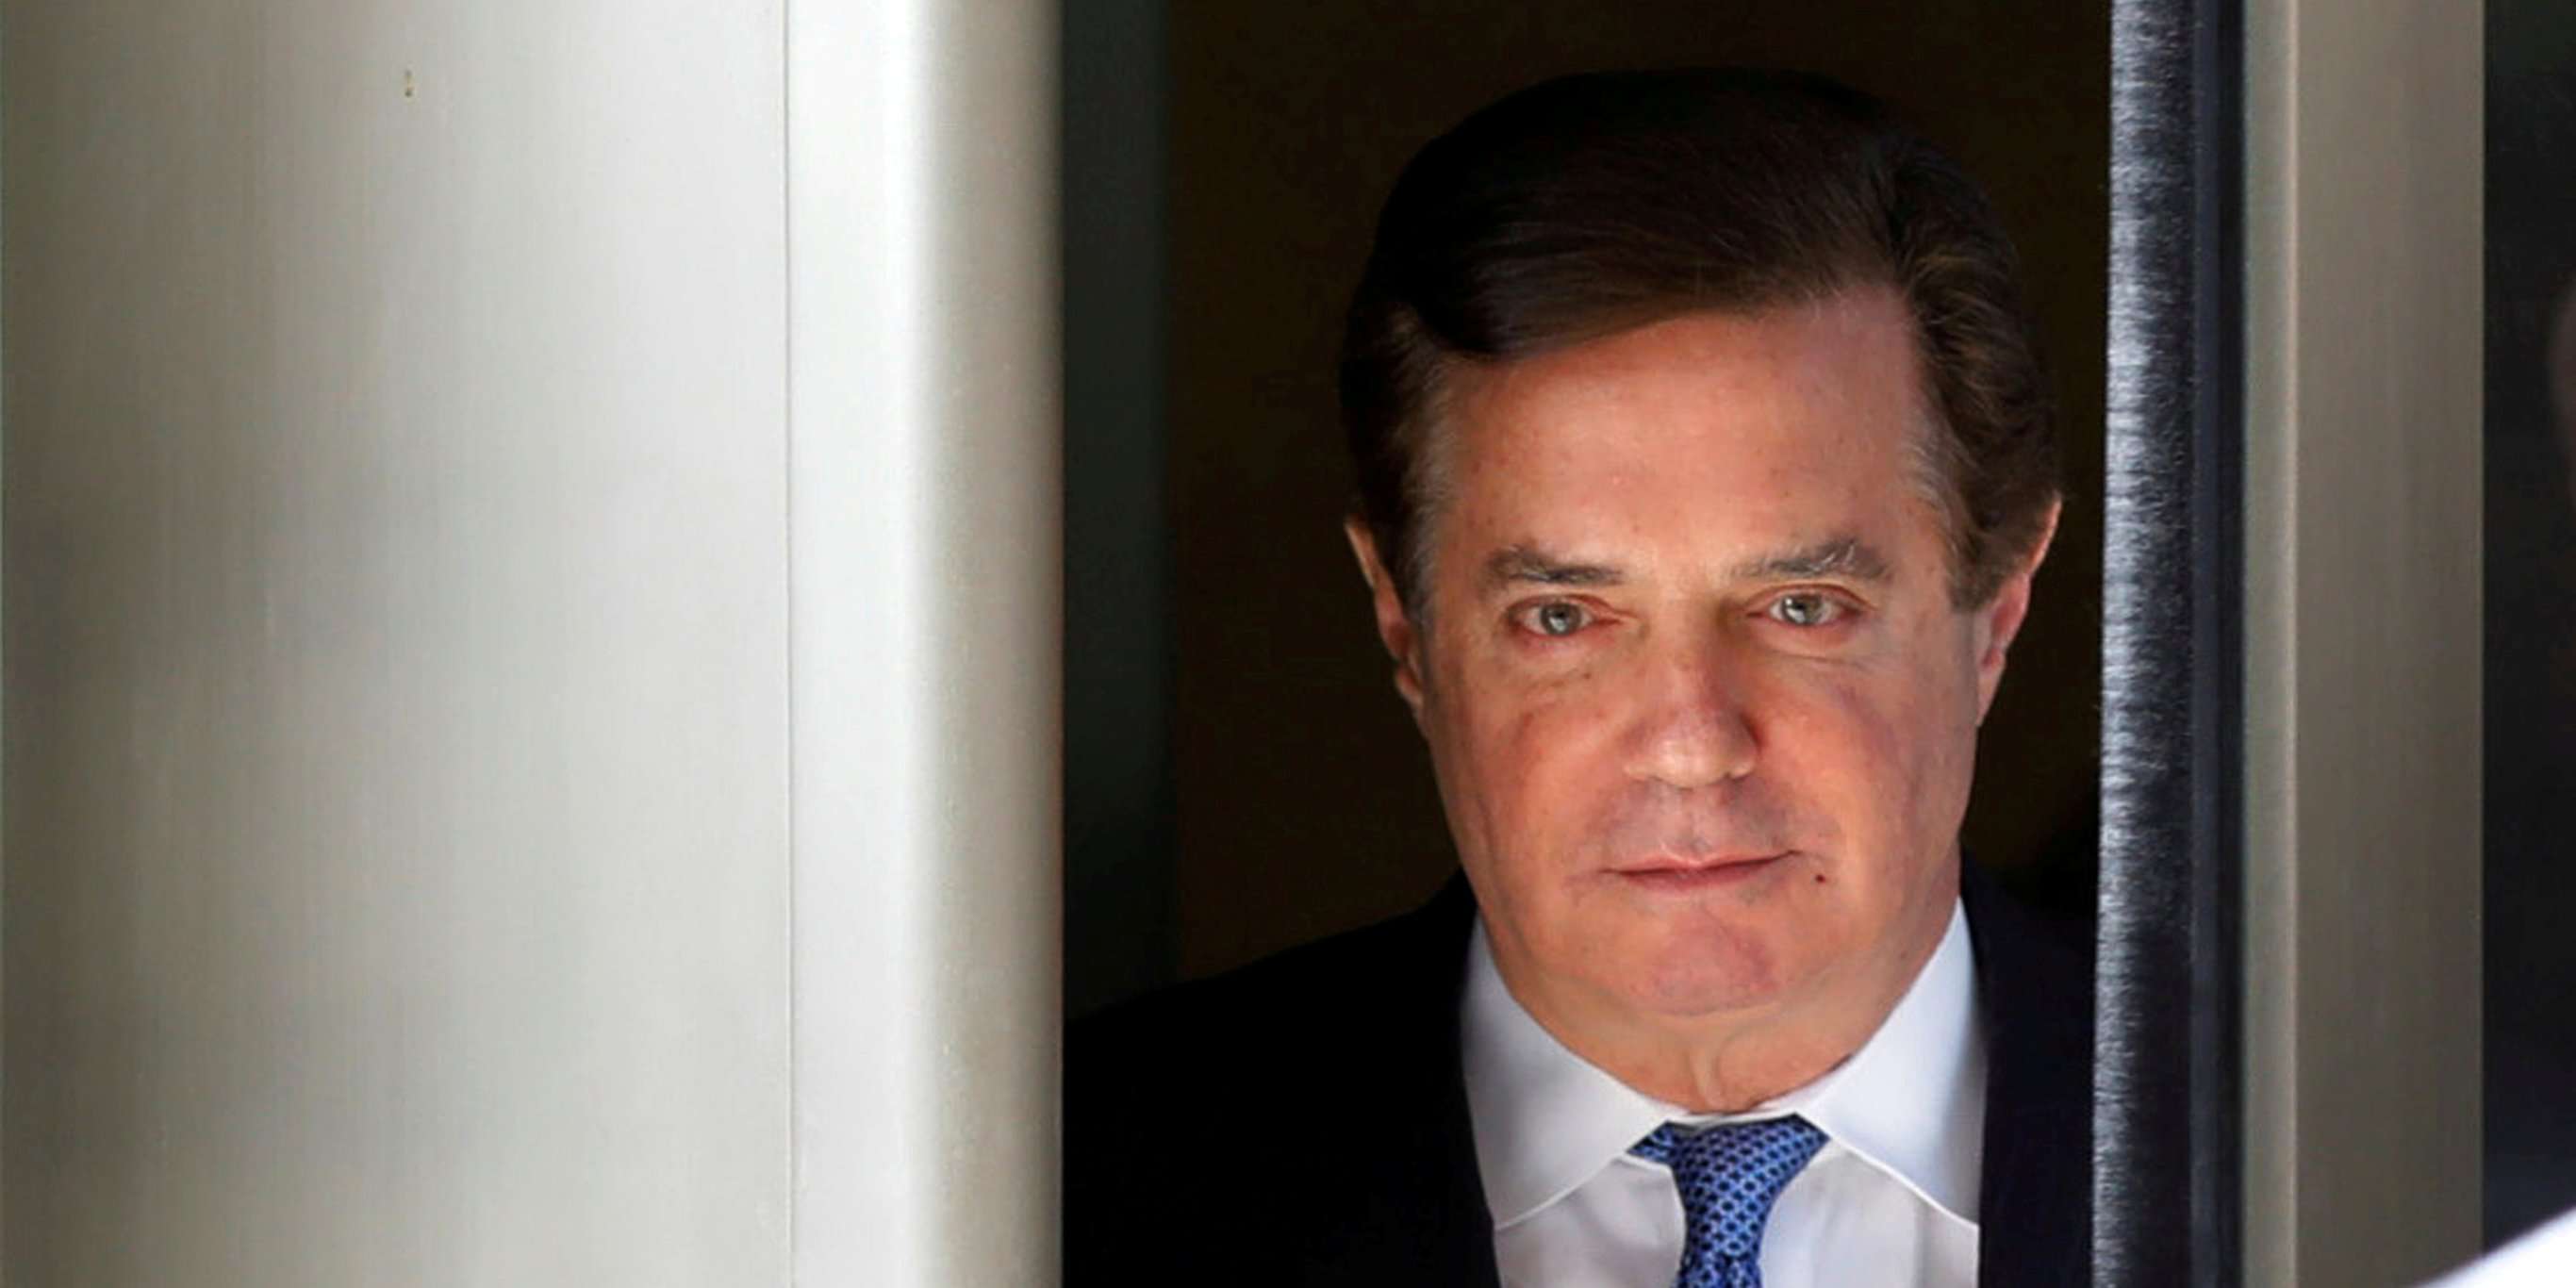 Taboola Ad Example 65079 - Paul Manafort Faces Over 7 Years In Prison For Conspiracy And Obstruction. Here's What You Need To Know About Trump's Former Campaign Chairman.